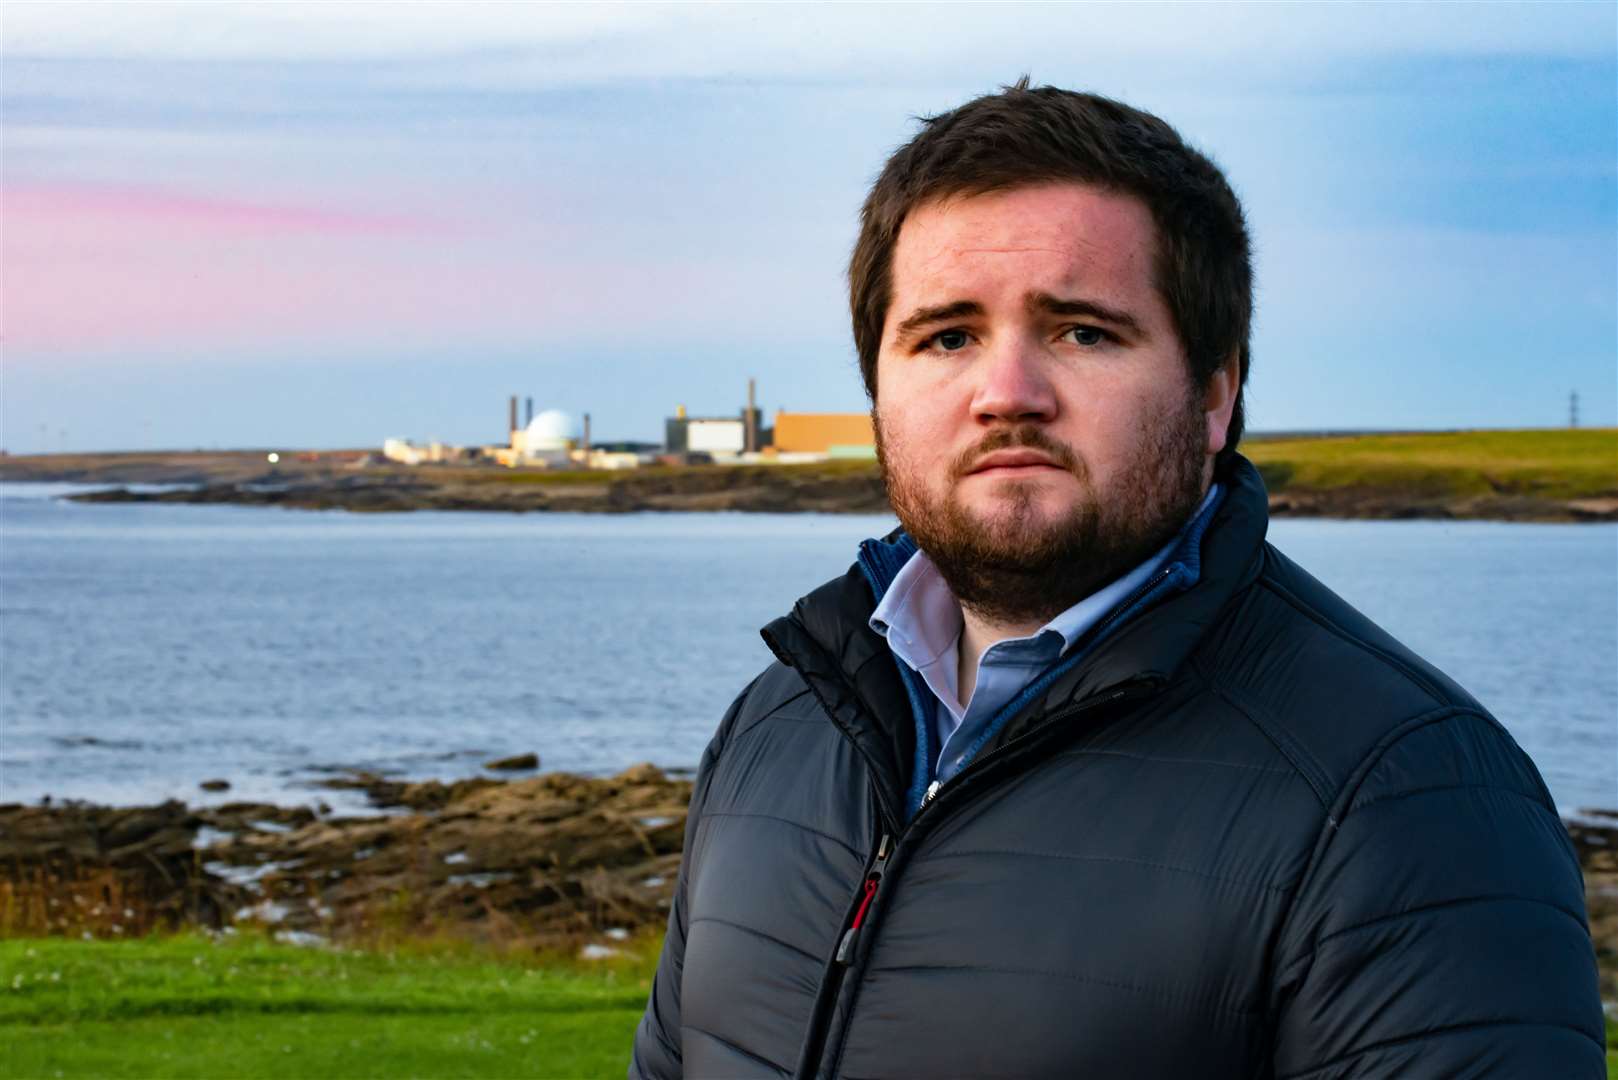 Struan Mackie wants to find out why there has been an increase in radioactive particles on Dounreay foreshore this year